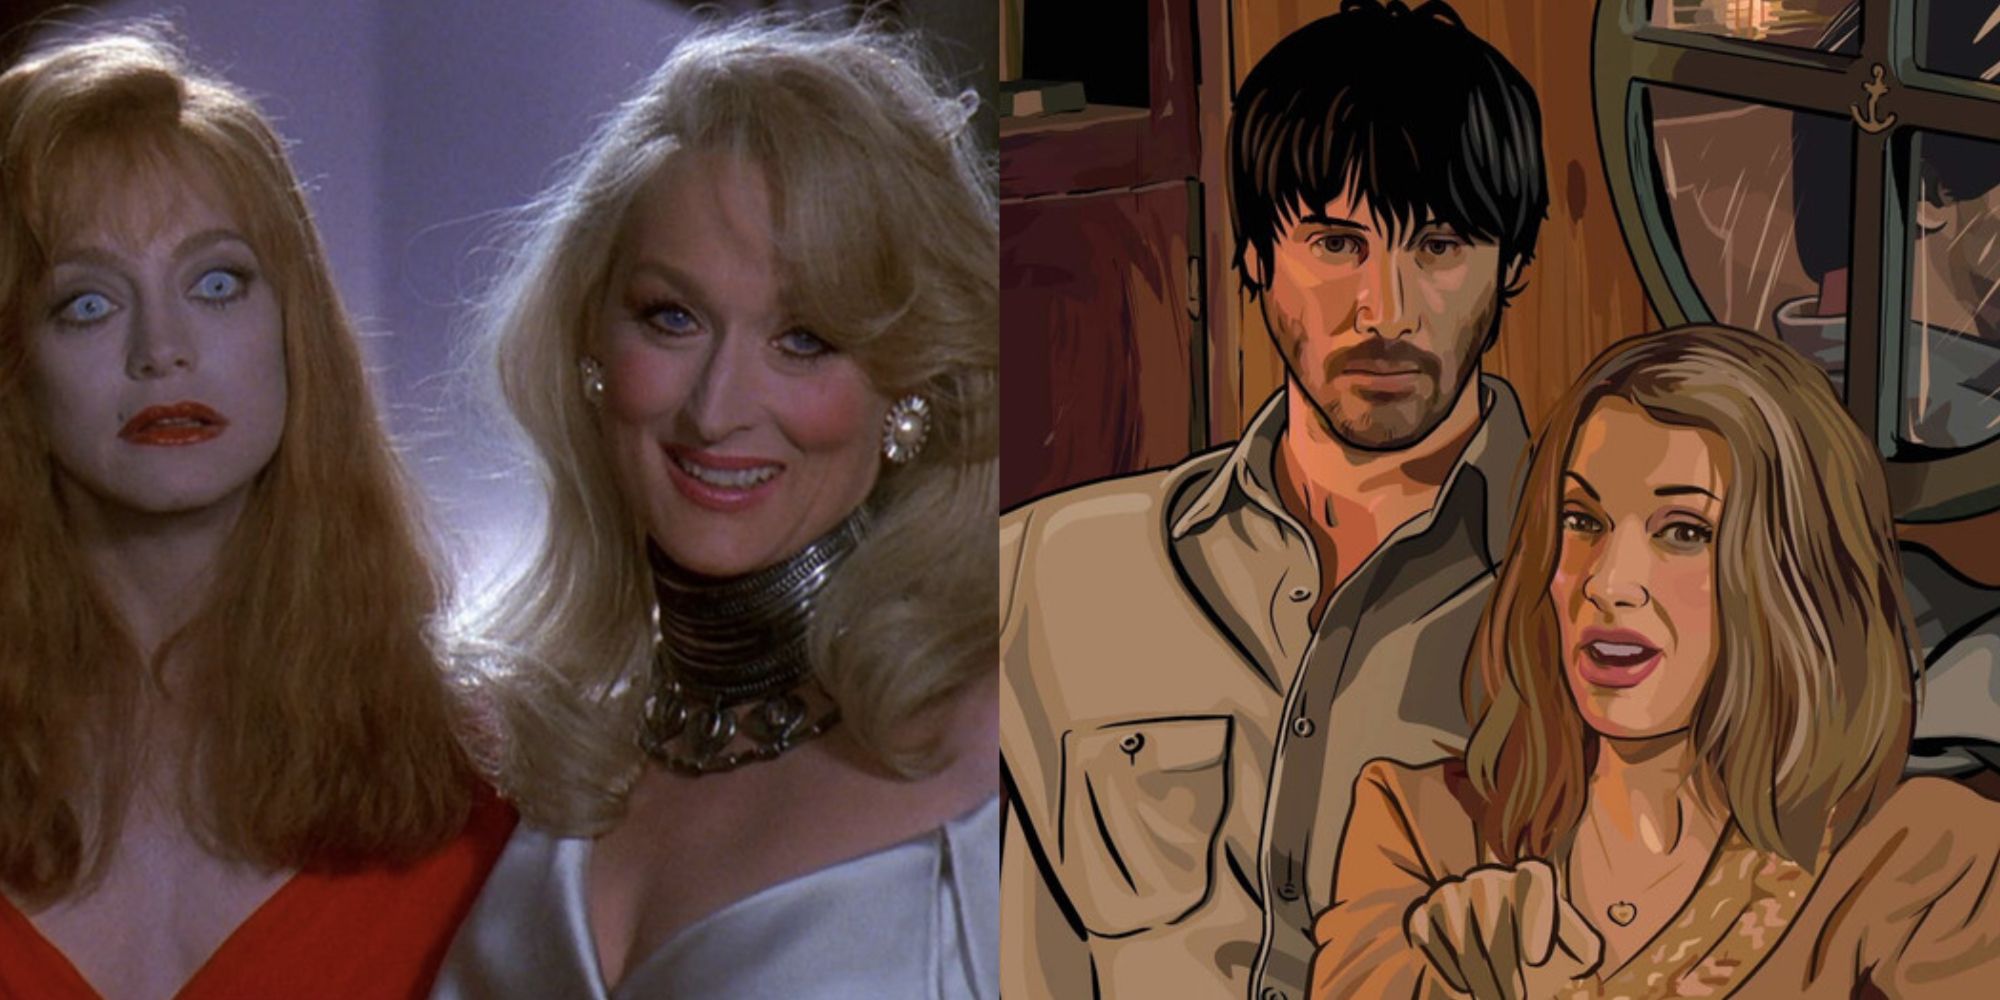 Scenes from A Scanner Darkly and Death Becomes Her